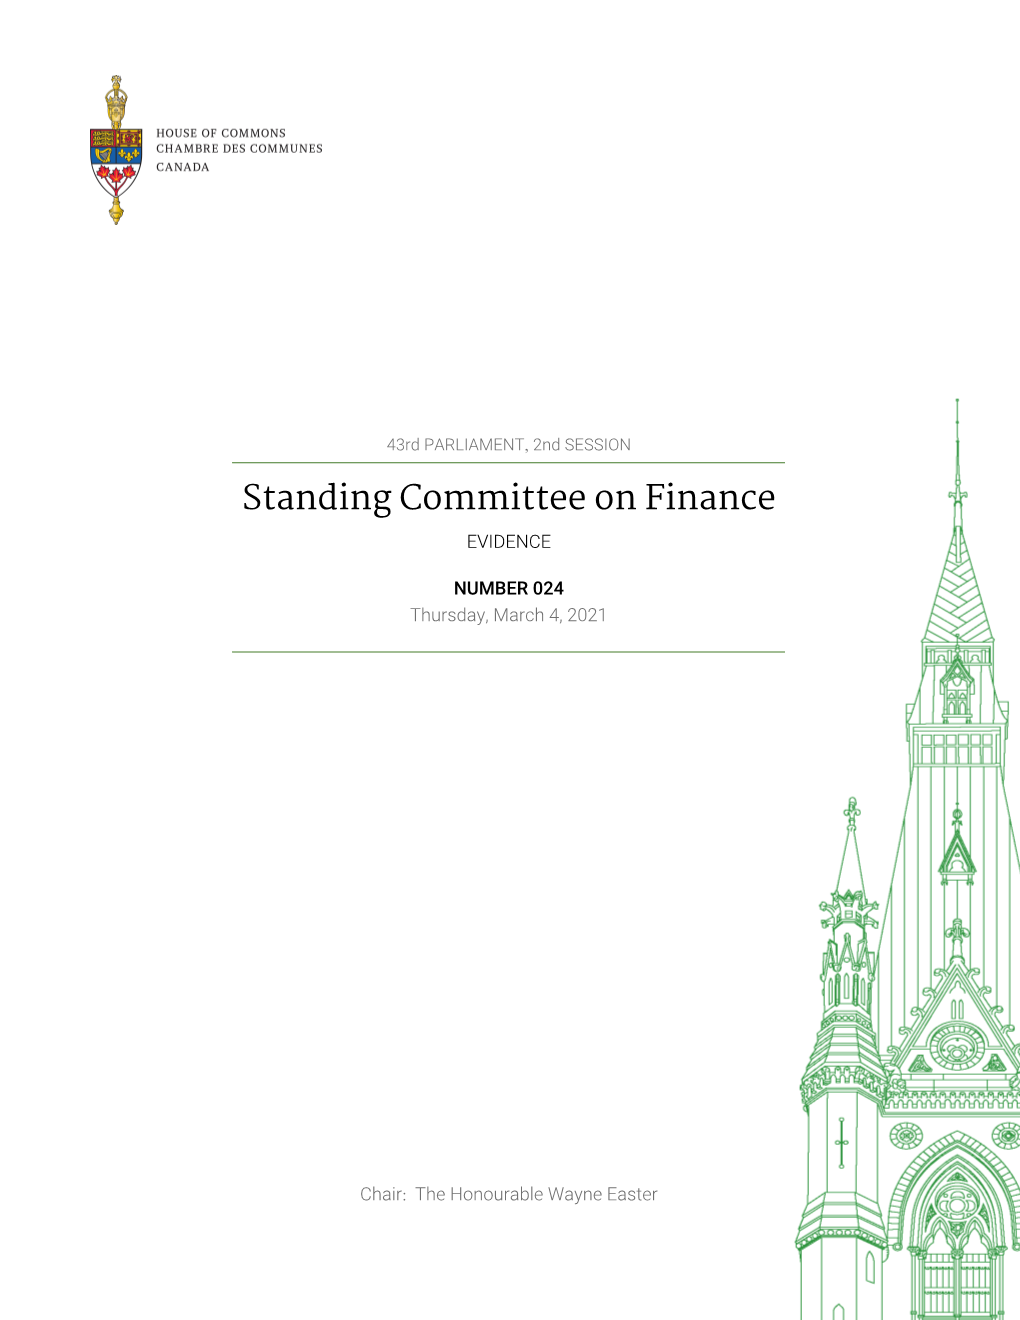 Evidence of the Standing Committee on Finance